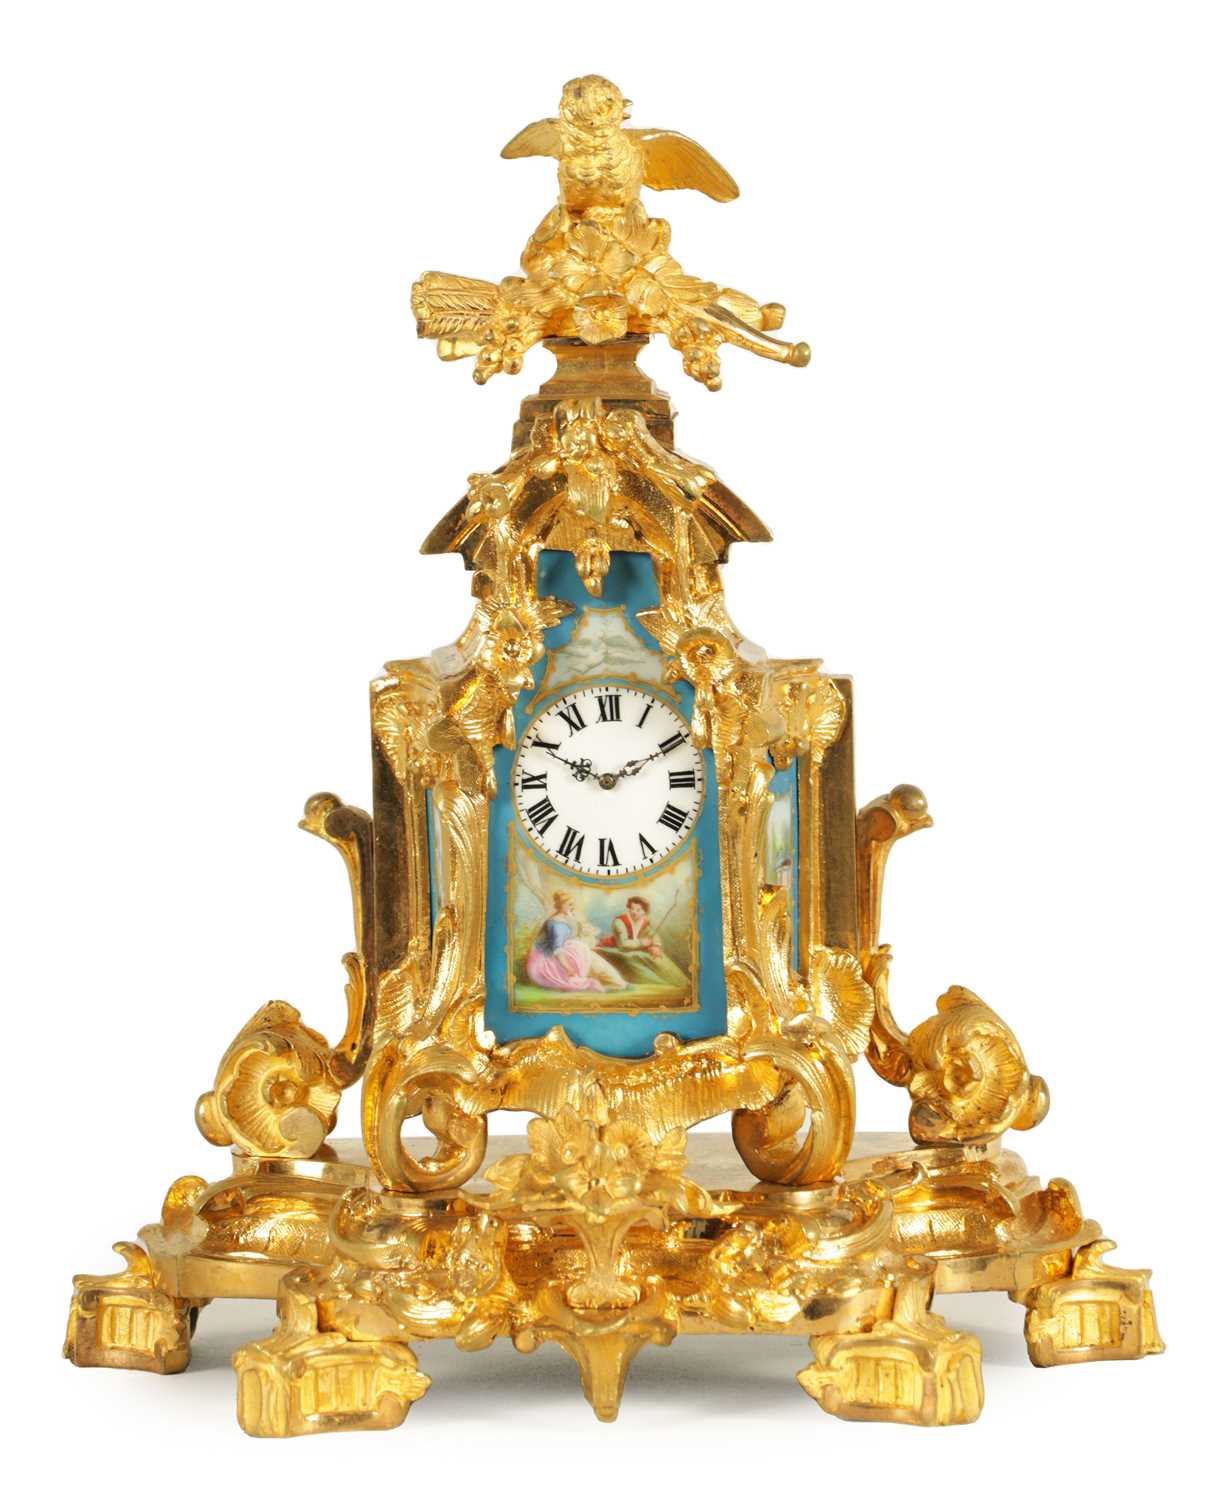 A SMALL LATE 19TH CENTURY FRENCH PORCELAIN PANELLED ORMOLU CARRIAGE STYLE MANTEL CLOCK